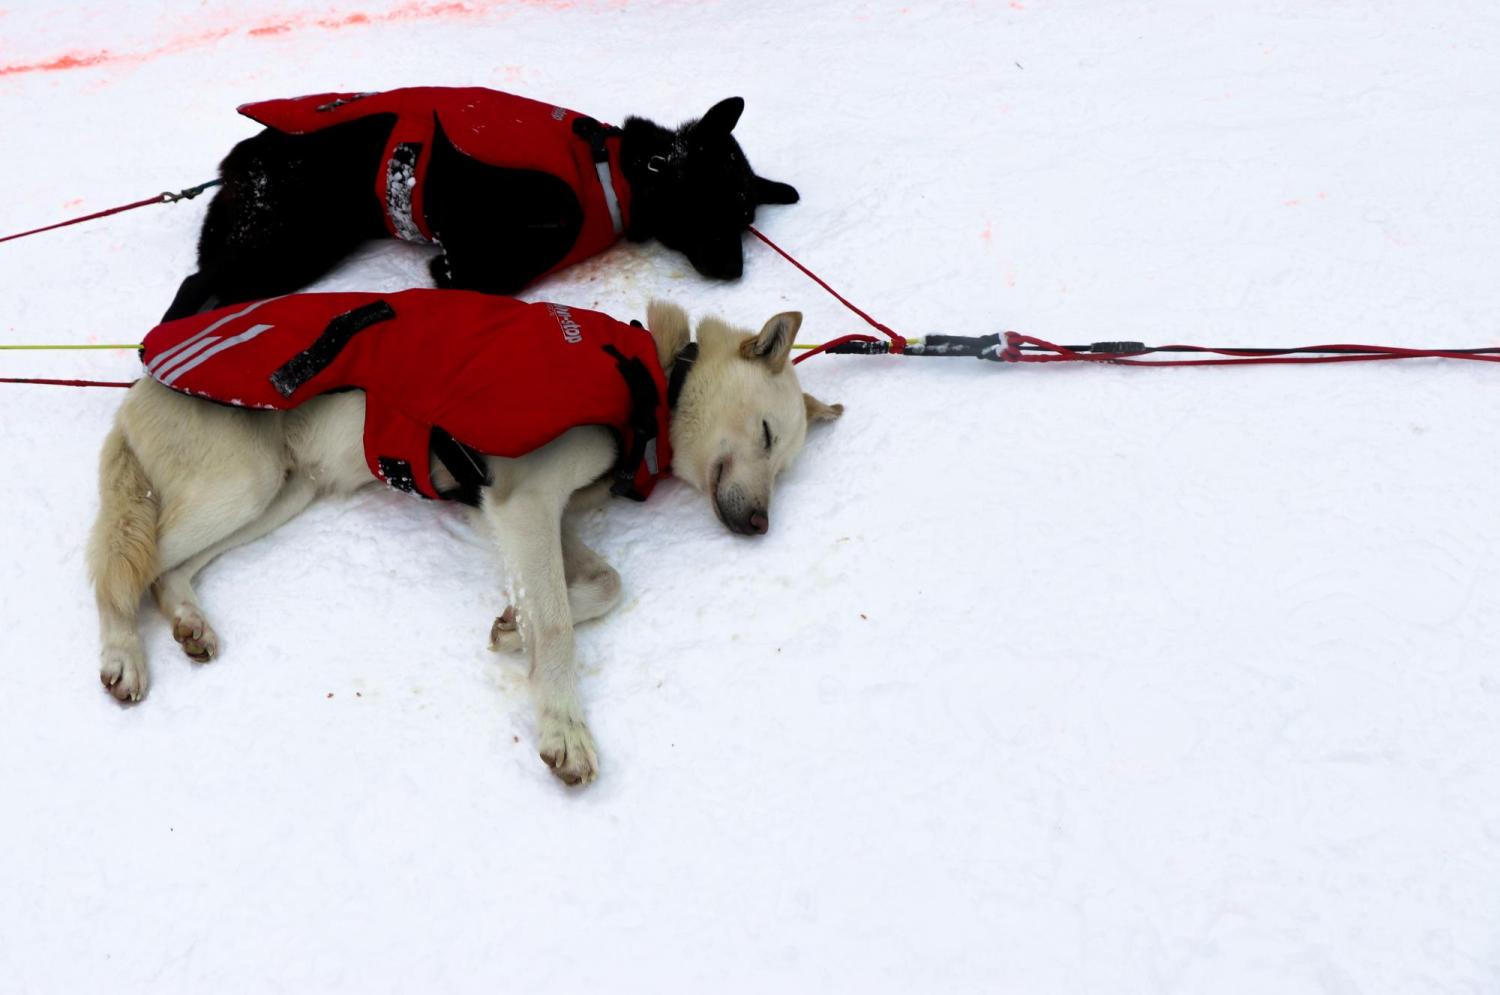 Dogs fall asleep after crossing the finishline in Whitehorse, Canada.